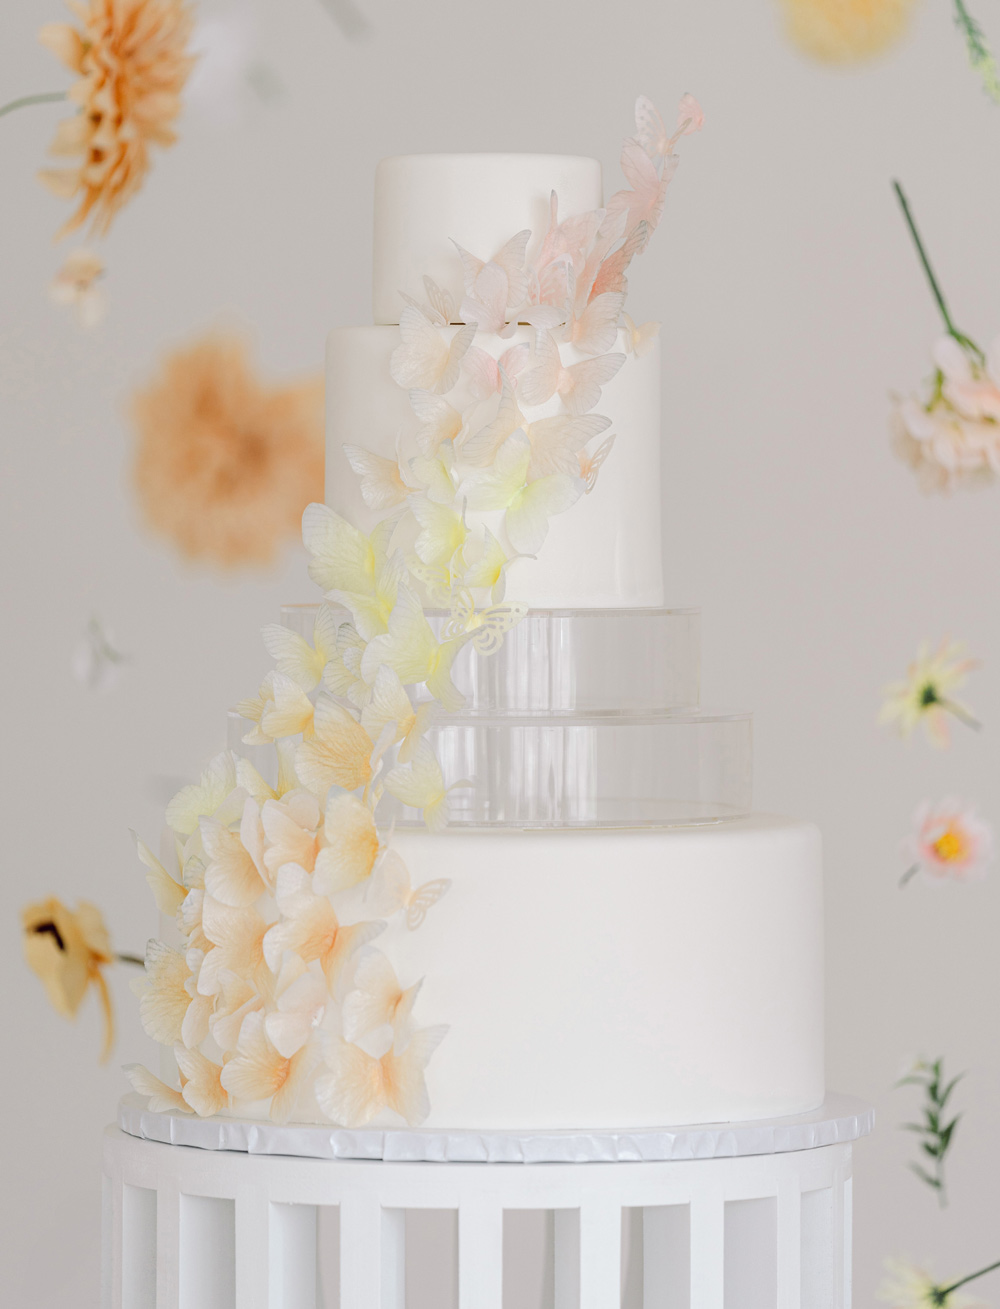 White Almond Cake layered with Swiss meringue buttercream and organic strawberry preserves, frosted in buttercream, finished with fondant, and decorated with Lucite tiers and hand cut wafer paper edible butterflies